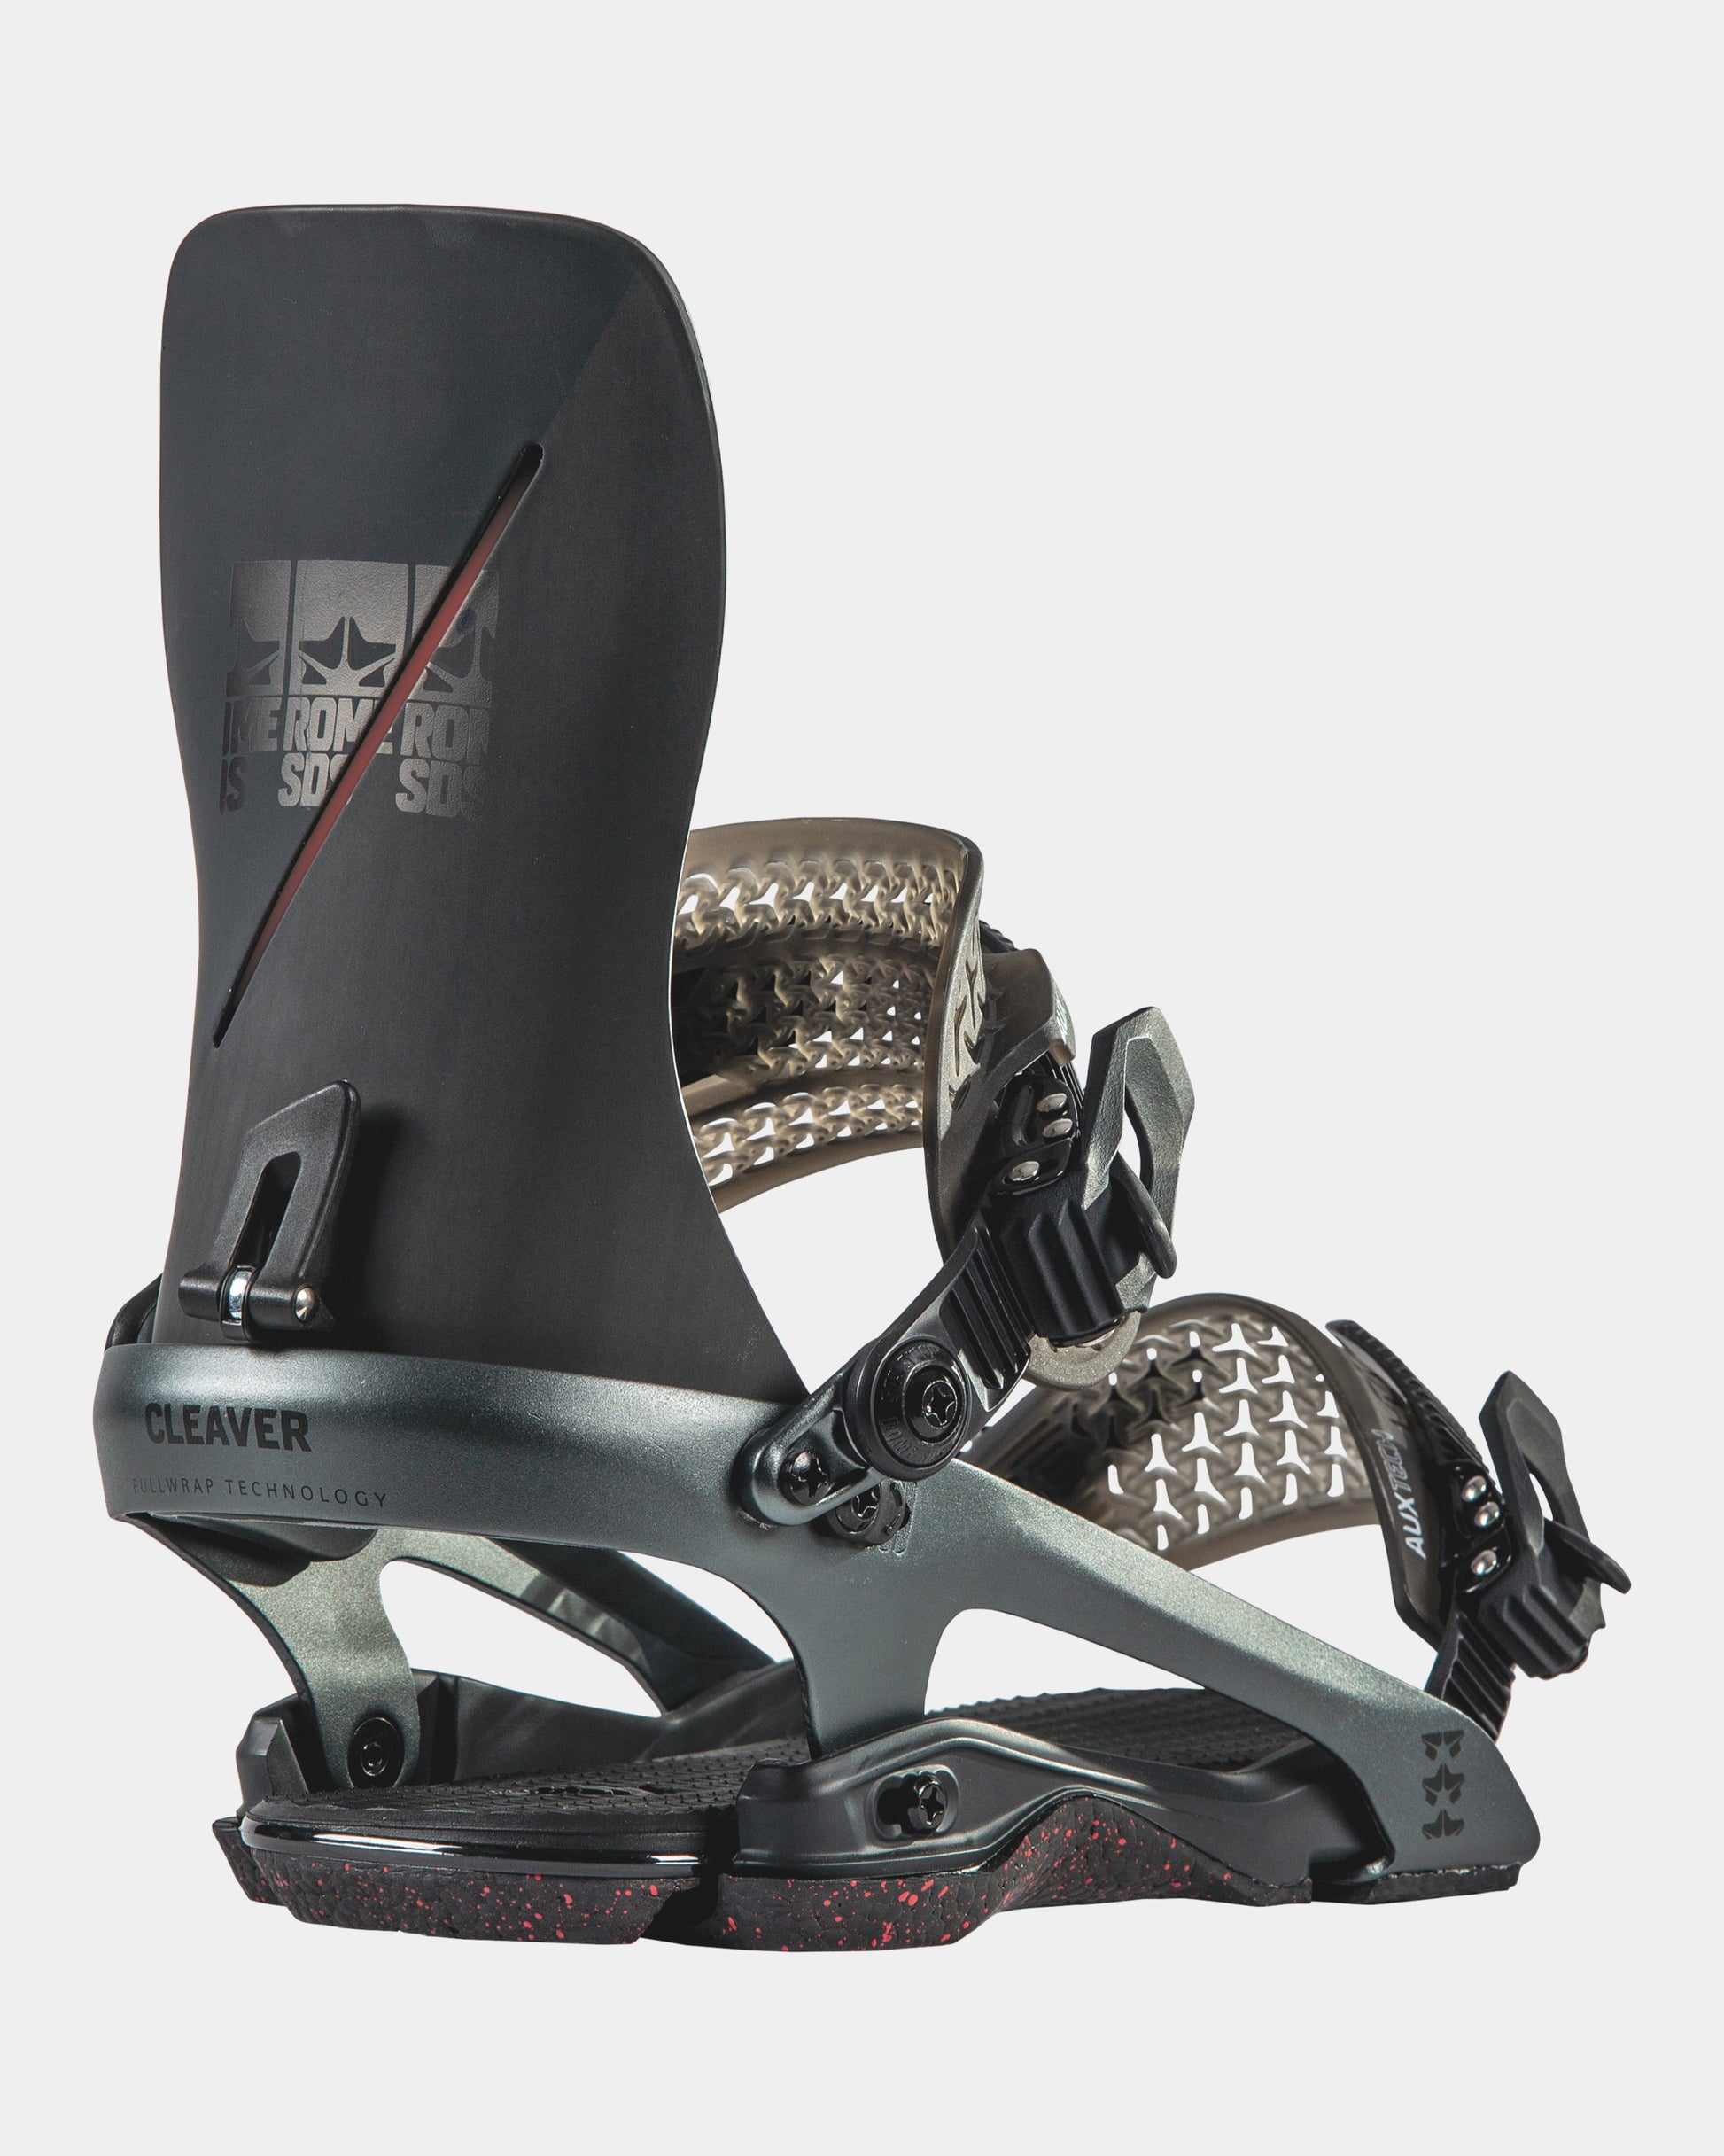 rome cleaver 2023 mens snowboard bindings product photo from back cover shot in studio color black grain